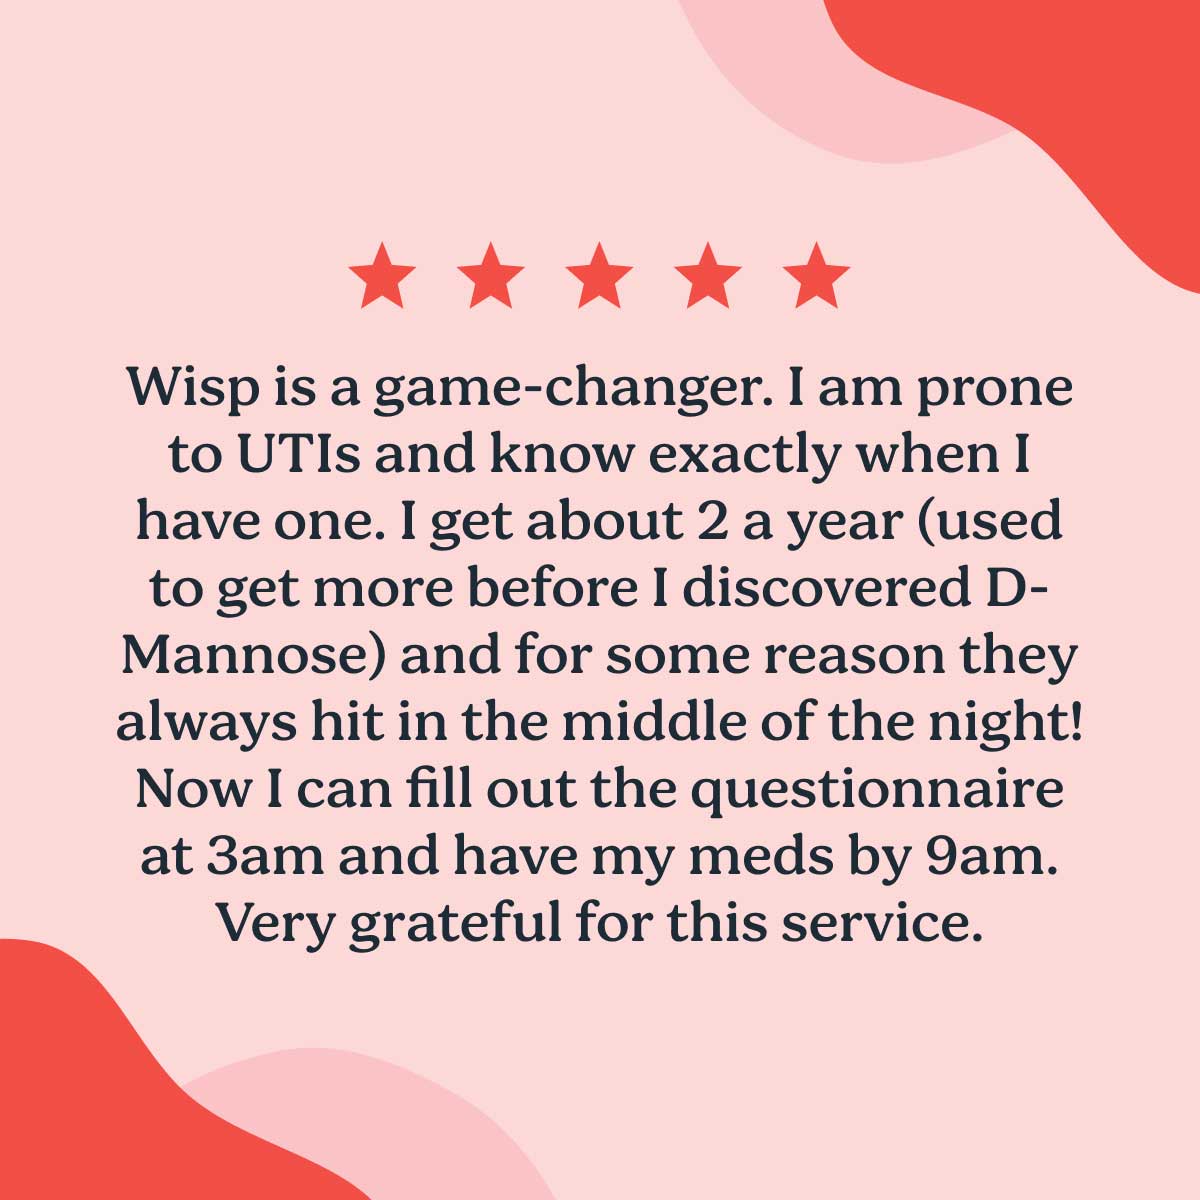 5 star customer review for D-Mannose UTI prevention with colorful abstract shapes on a pink background